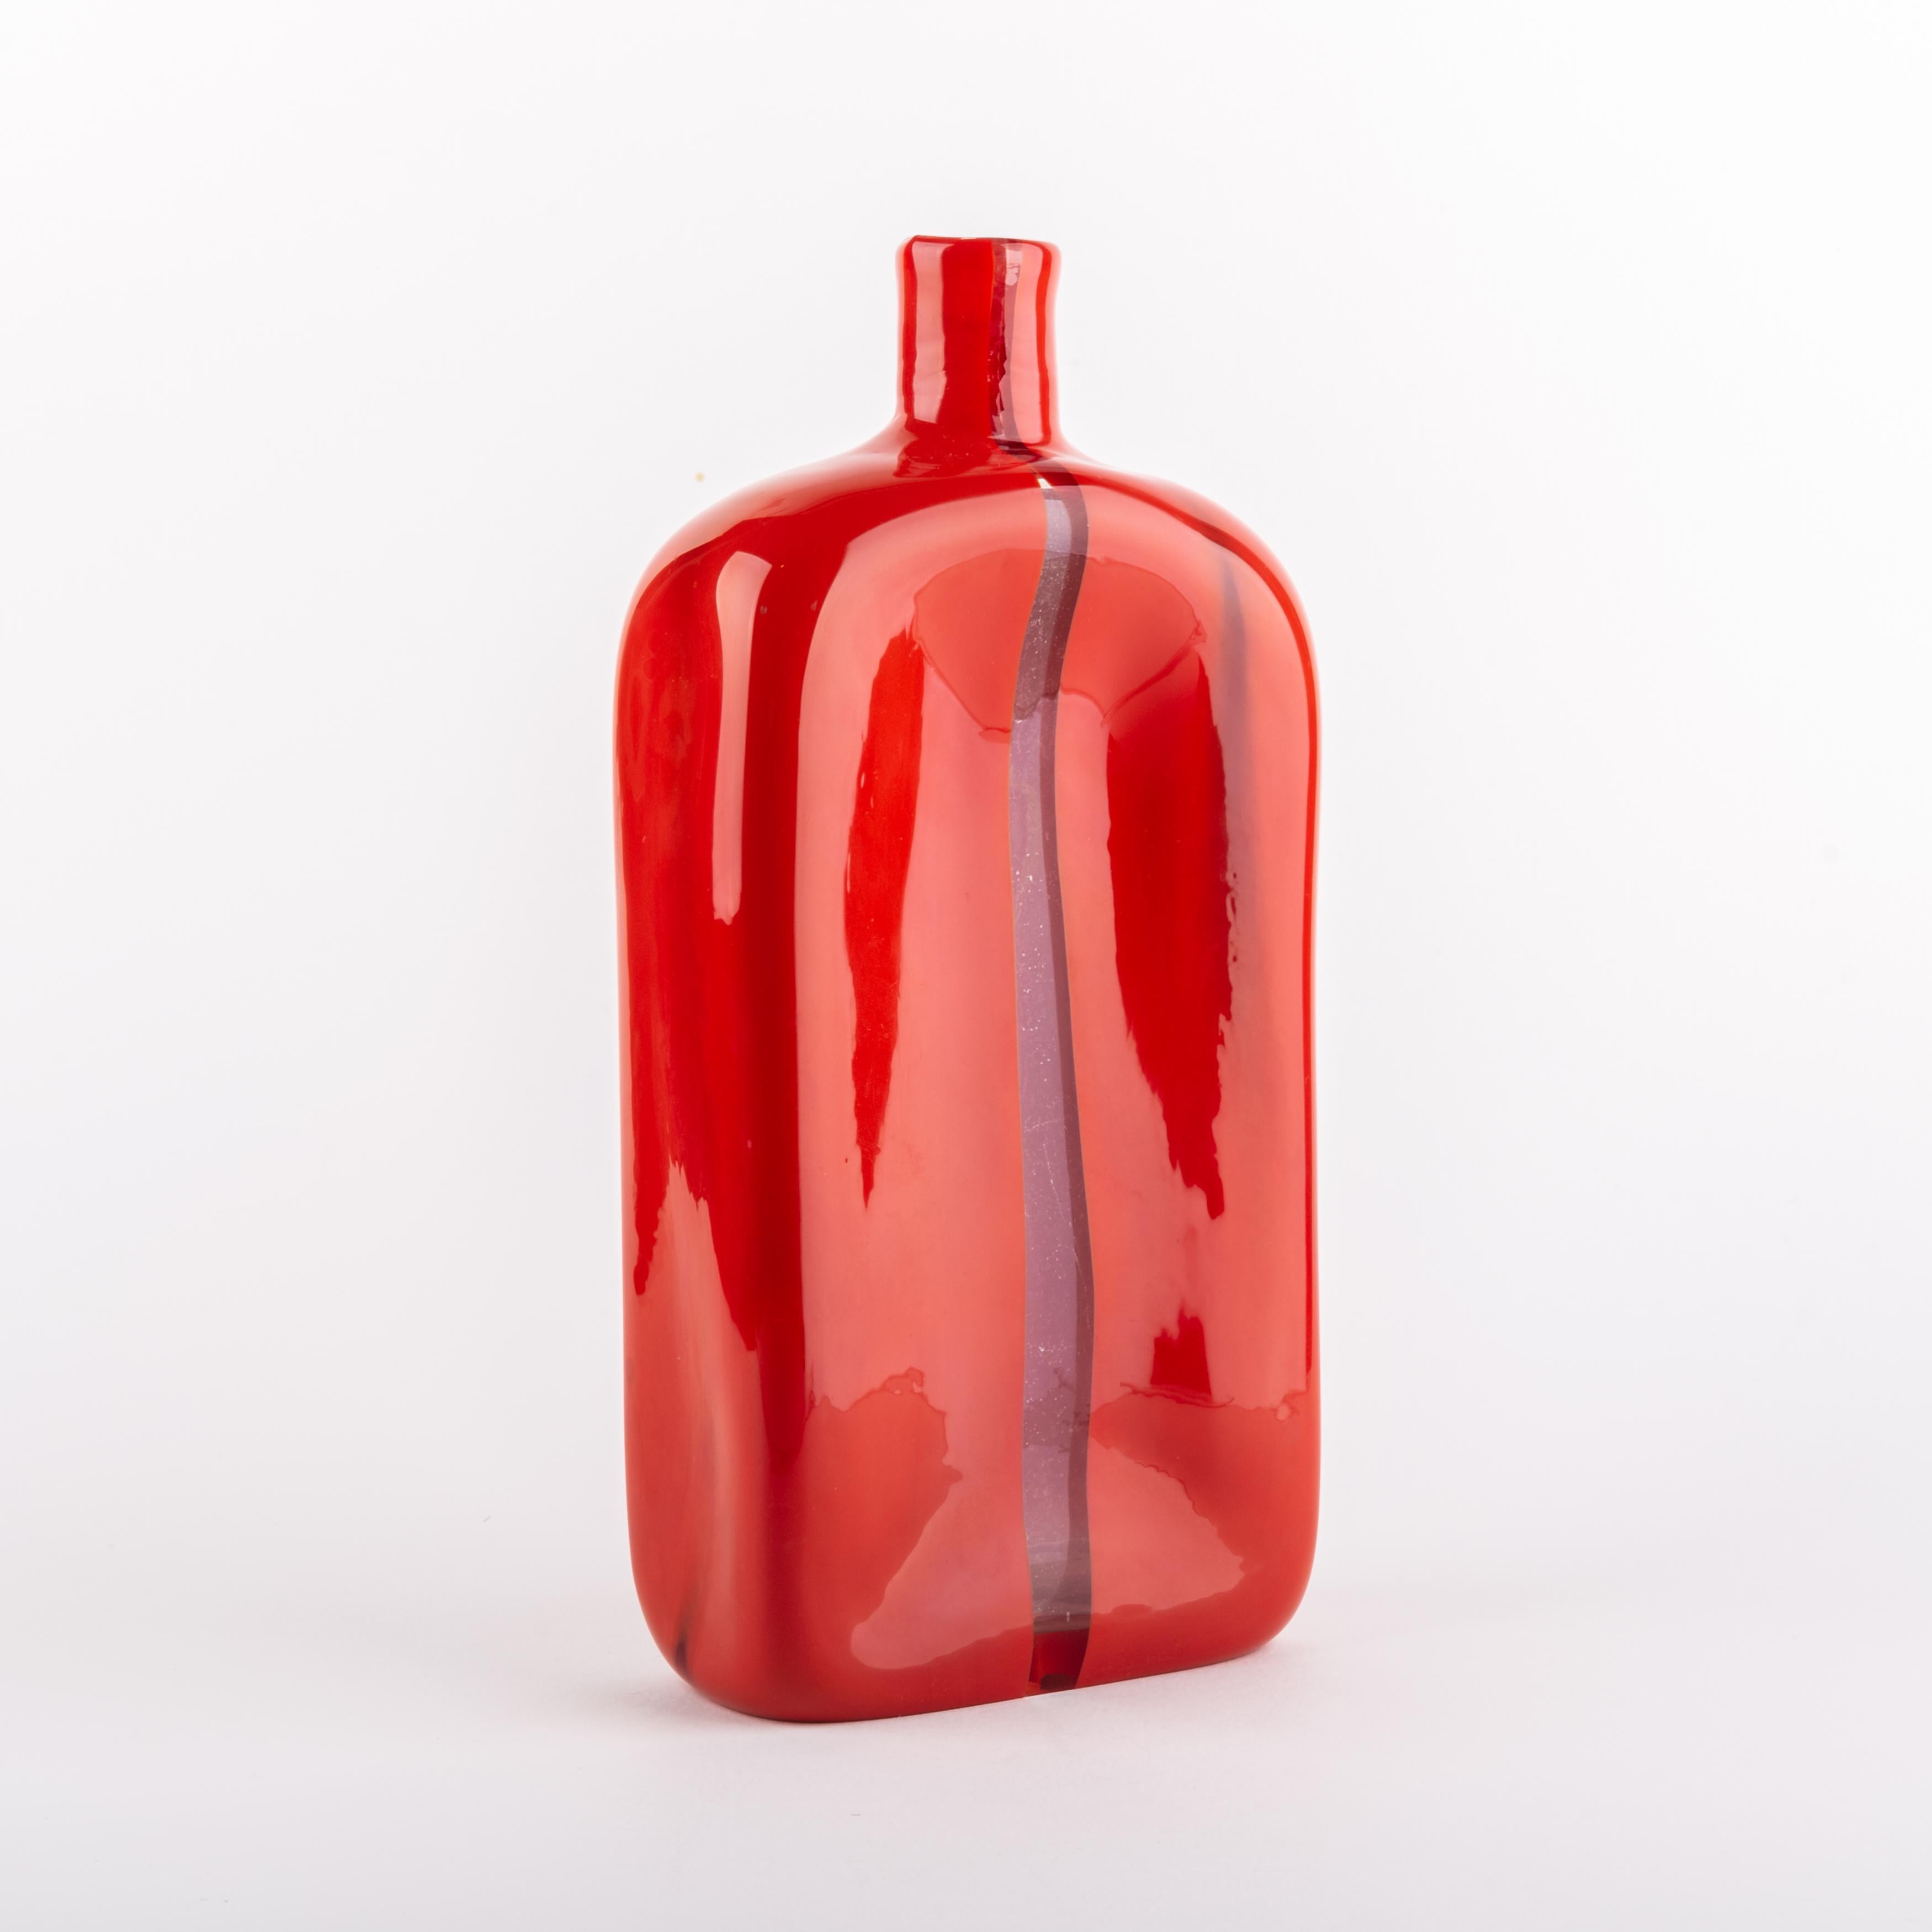 Very nice and rare red bottle designed by Toni Zuccheri and manufactured by Venini Murano in Italy, circa 1960.
The name of this series is Scolpito, when on display the bottle seems to be divided in two parts.

We are located in Belgium; we